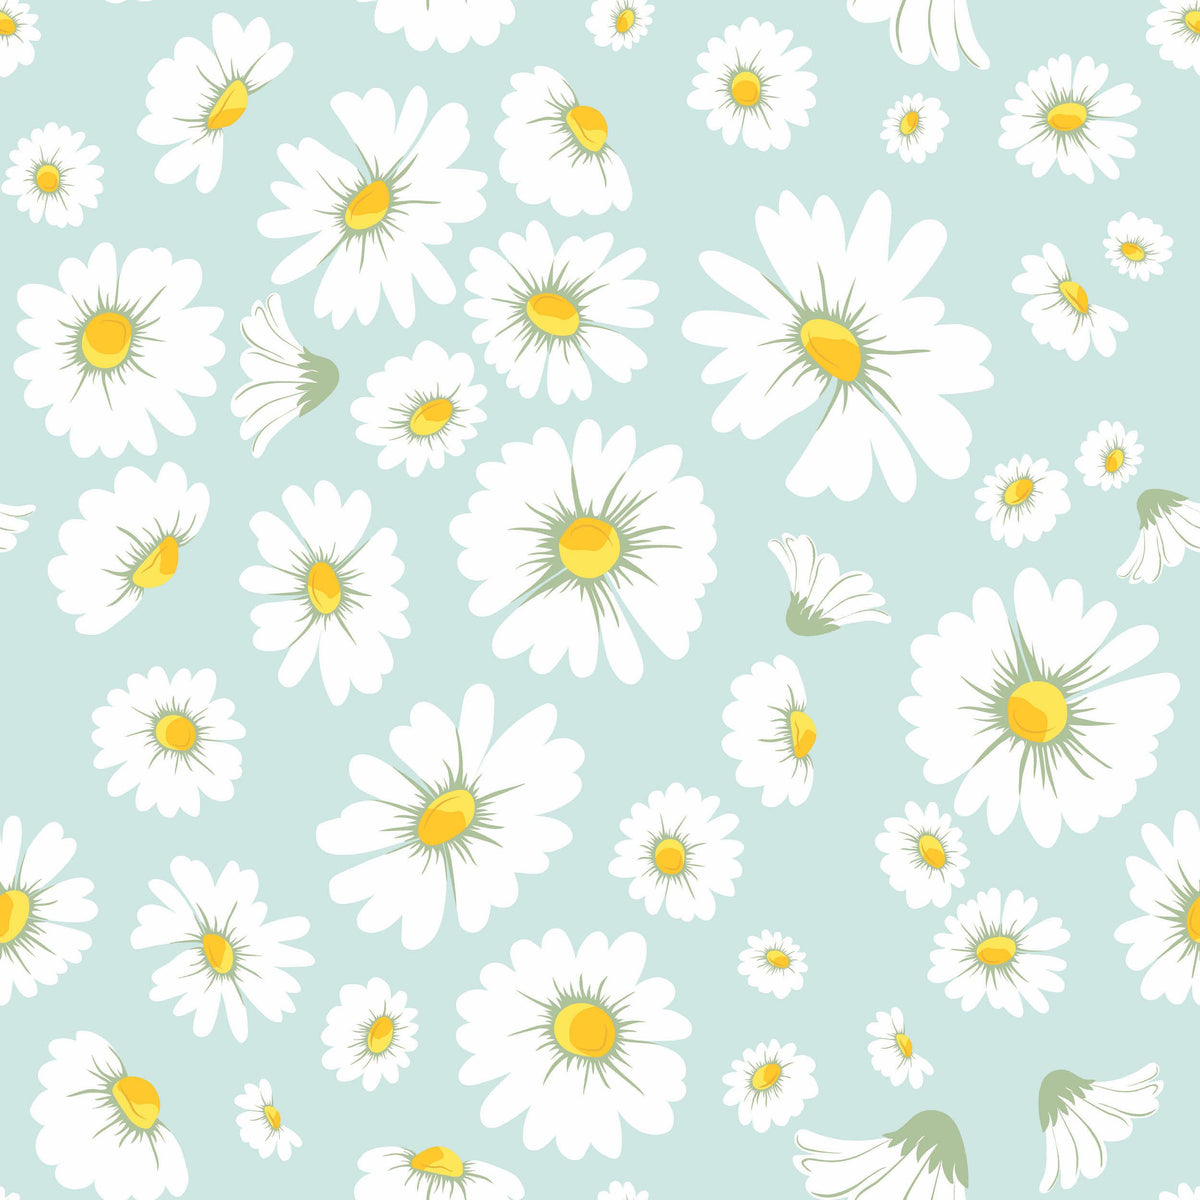 Daisy Print White Floral Wrapping Paper - 20 Sheets